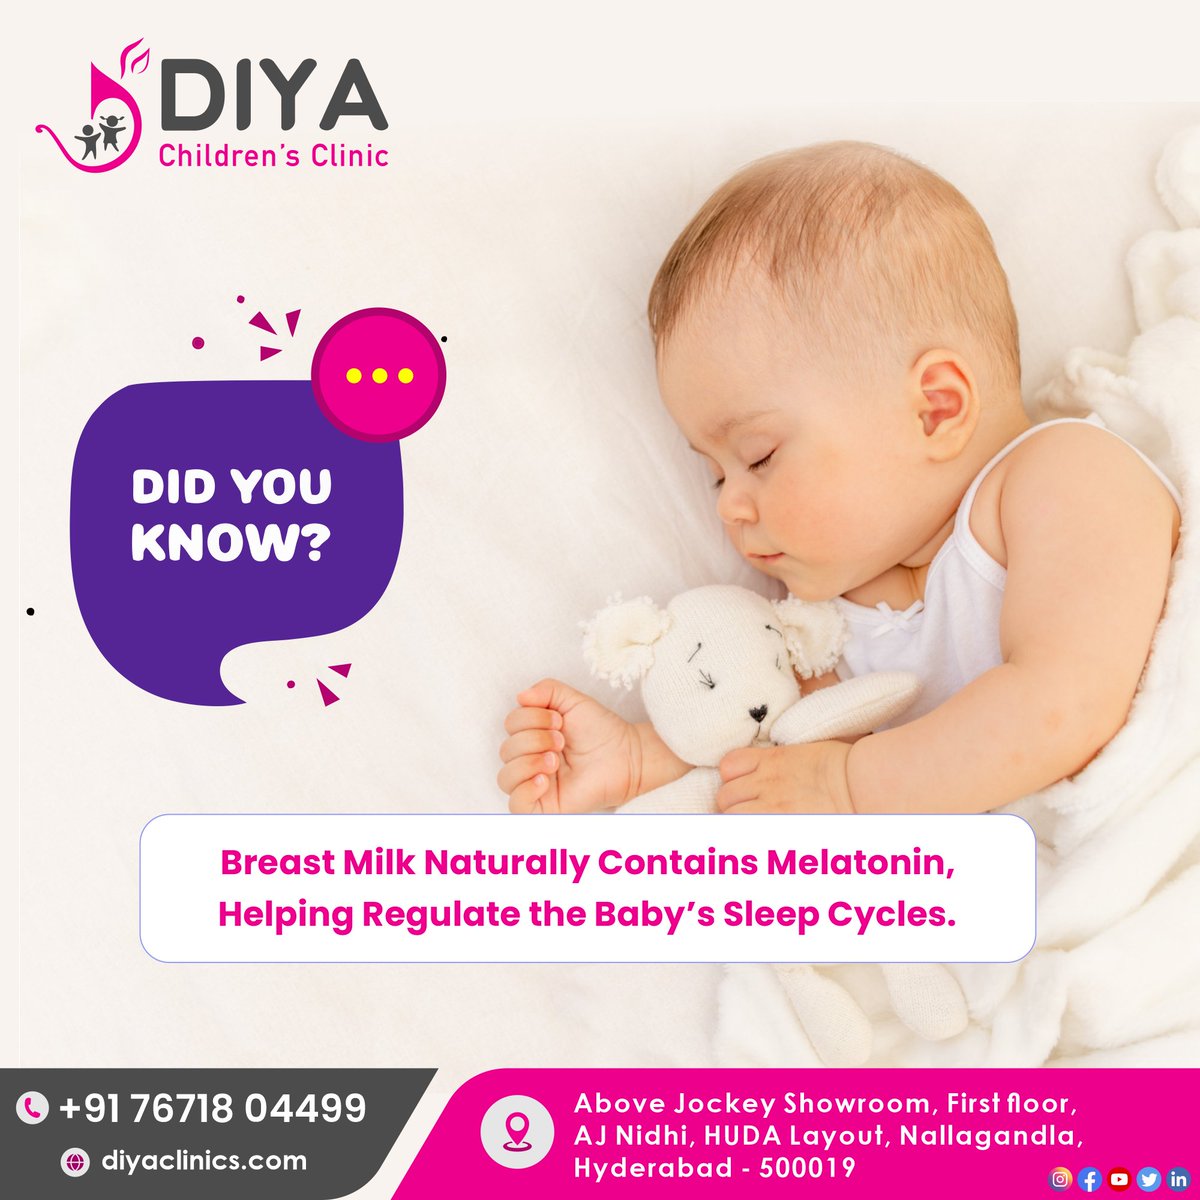 Diya Children's Clinic recommends consistent bedtime routines, a calm sleep environment, and safe sleep practices like placing babies on their backs in cribs.'
#Diyachildernsclinic #babysleep #nallagandla  #hyderabad